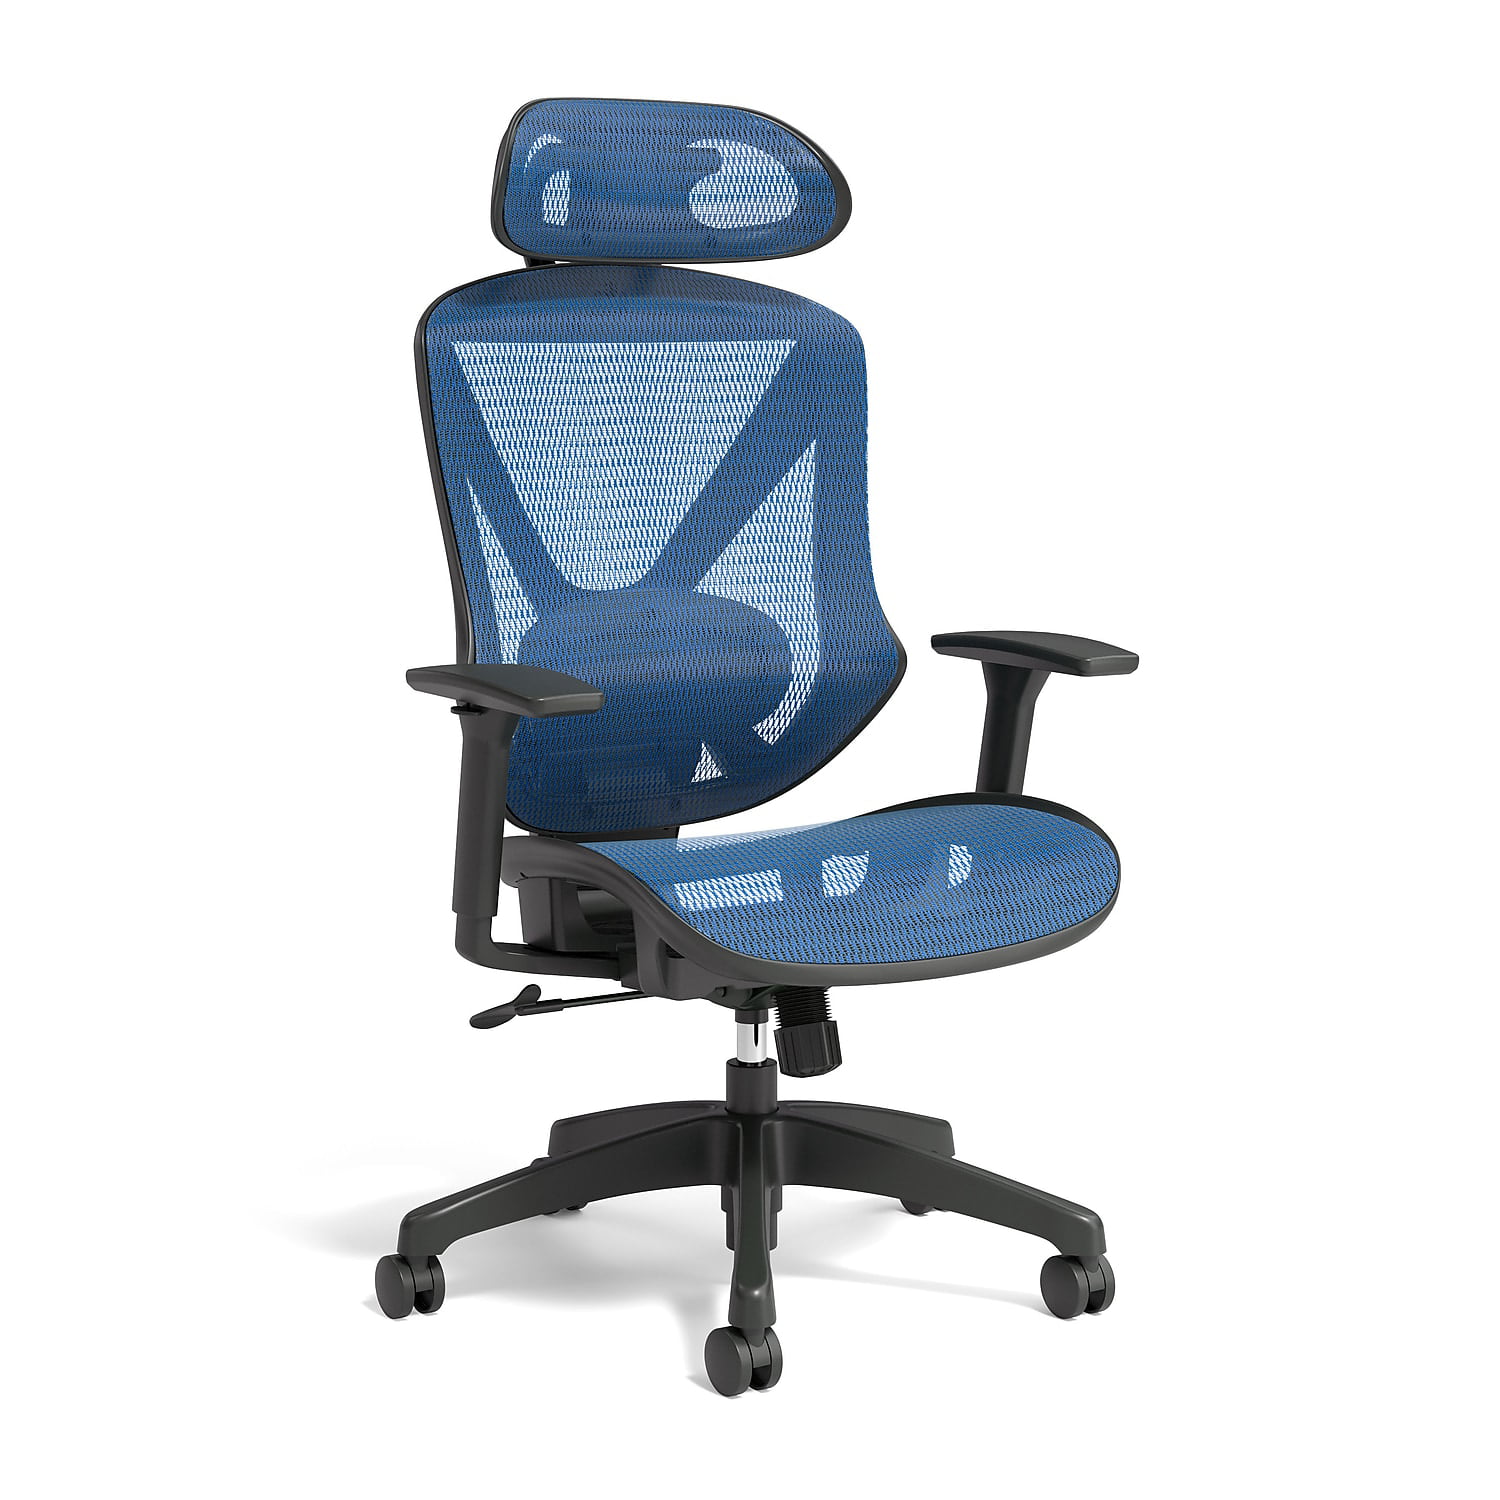 Teal & Gray Colors Details about   Mesh Task Chair with Plush Padded Seat 